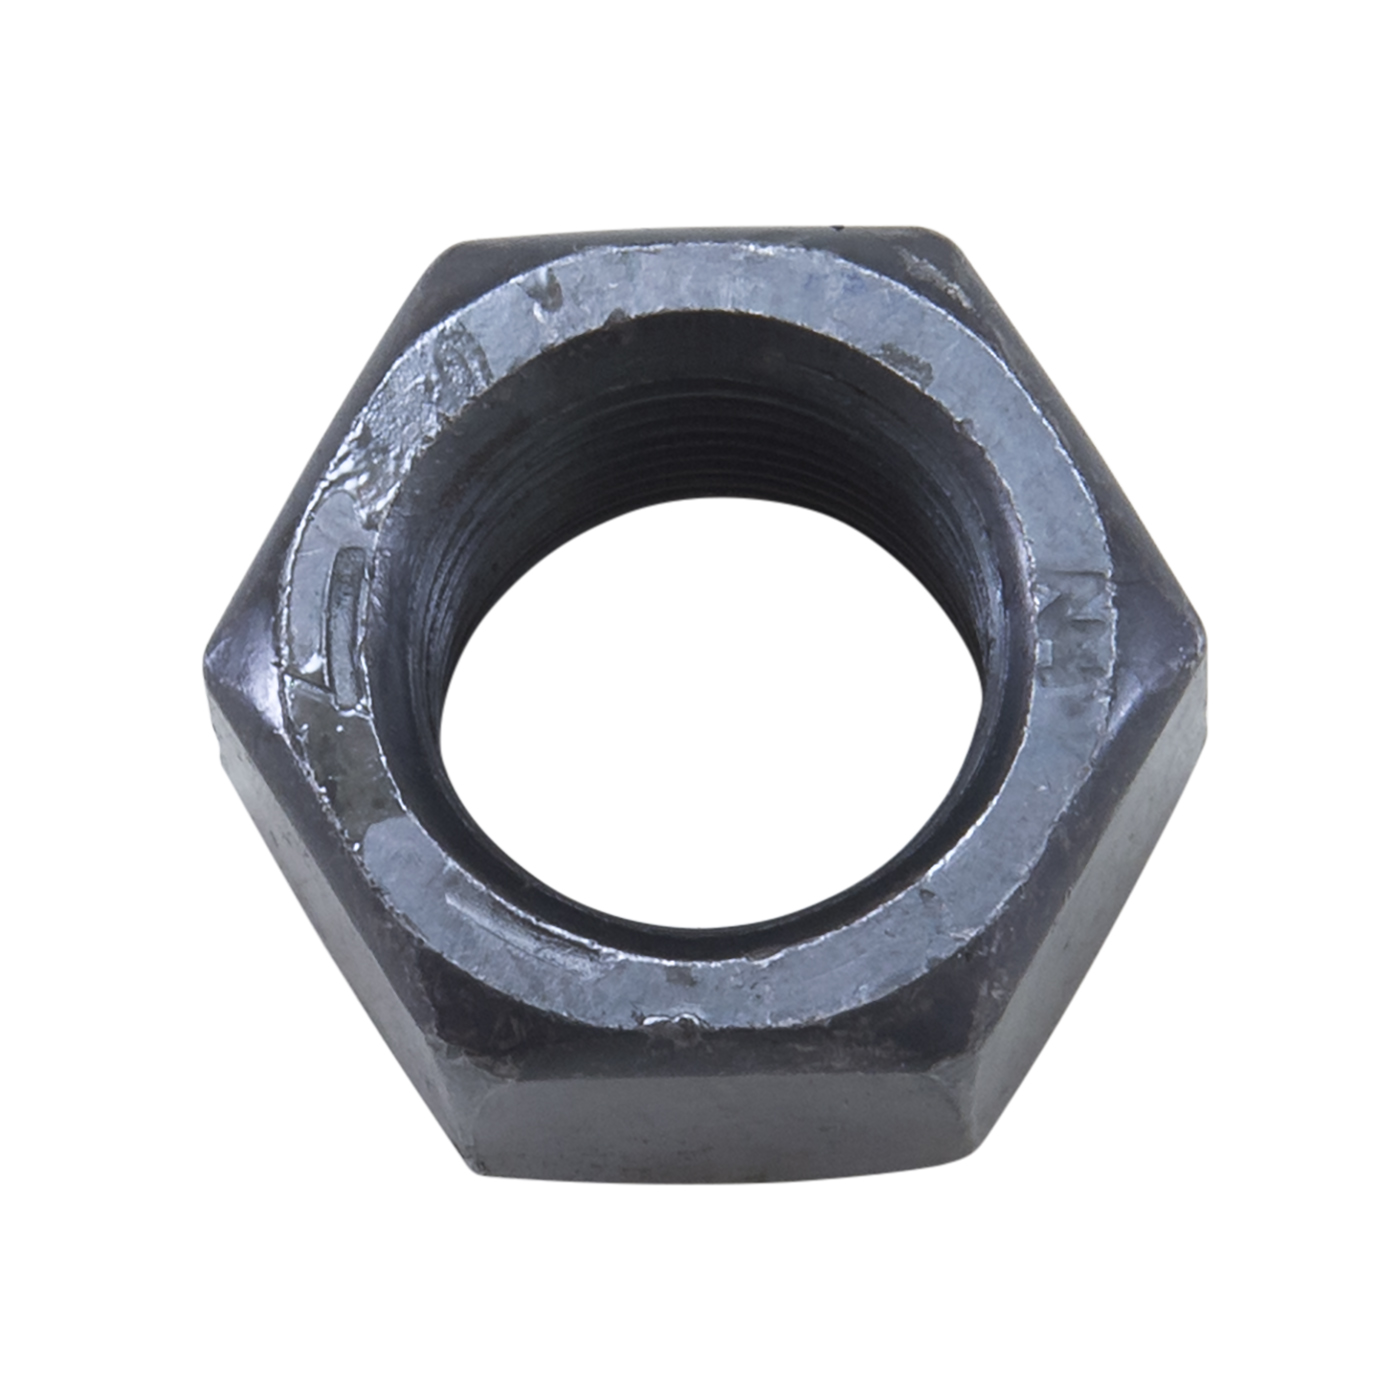 ABS exciter ring (tone ring) for 9.75 Ford., YSPABS-020